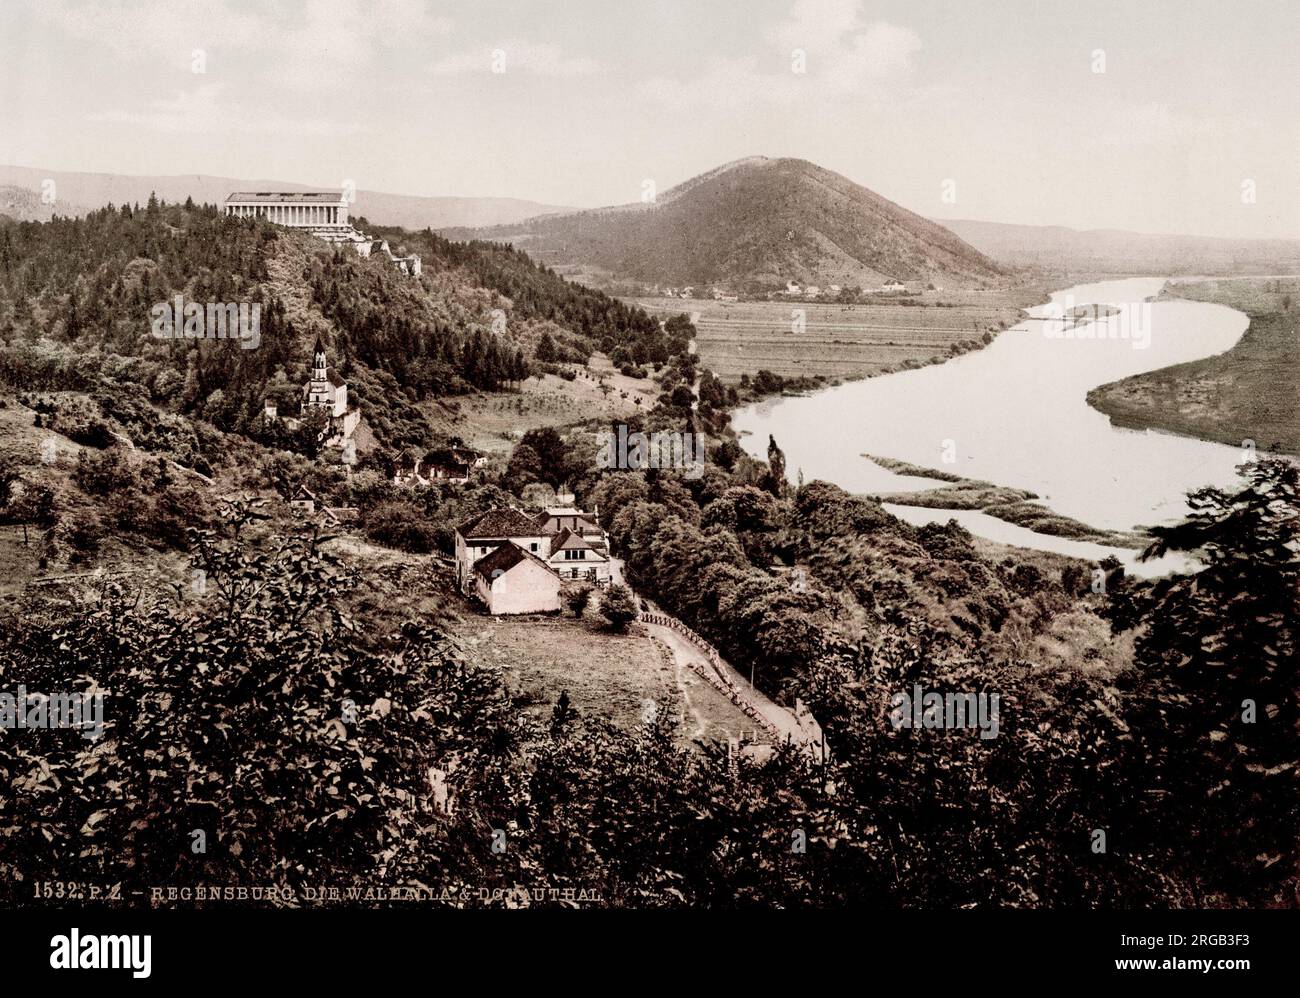 Vintage 19th century / 1900 photograph: Regensburg Germany, the Walhalla, and Donauthal. The Walhalla is a hall of fame that honours laudable and distinguished people in German history Stock Photo